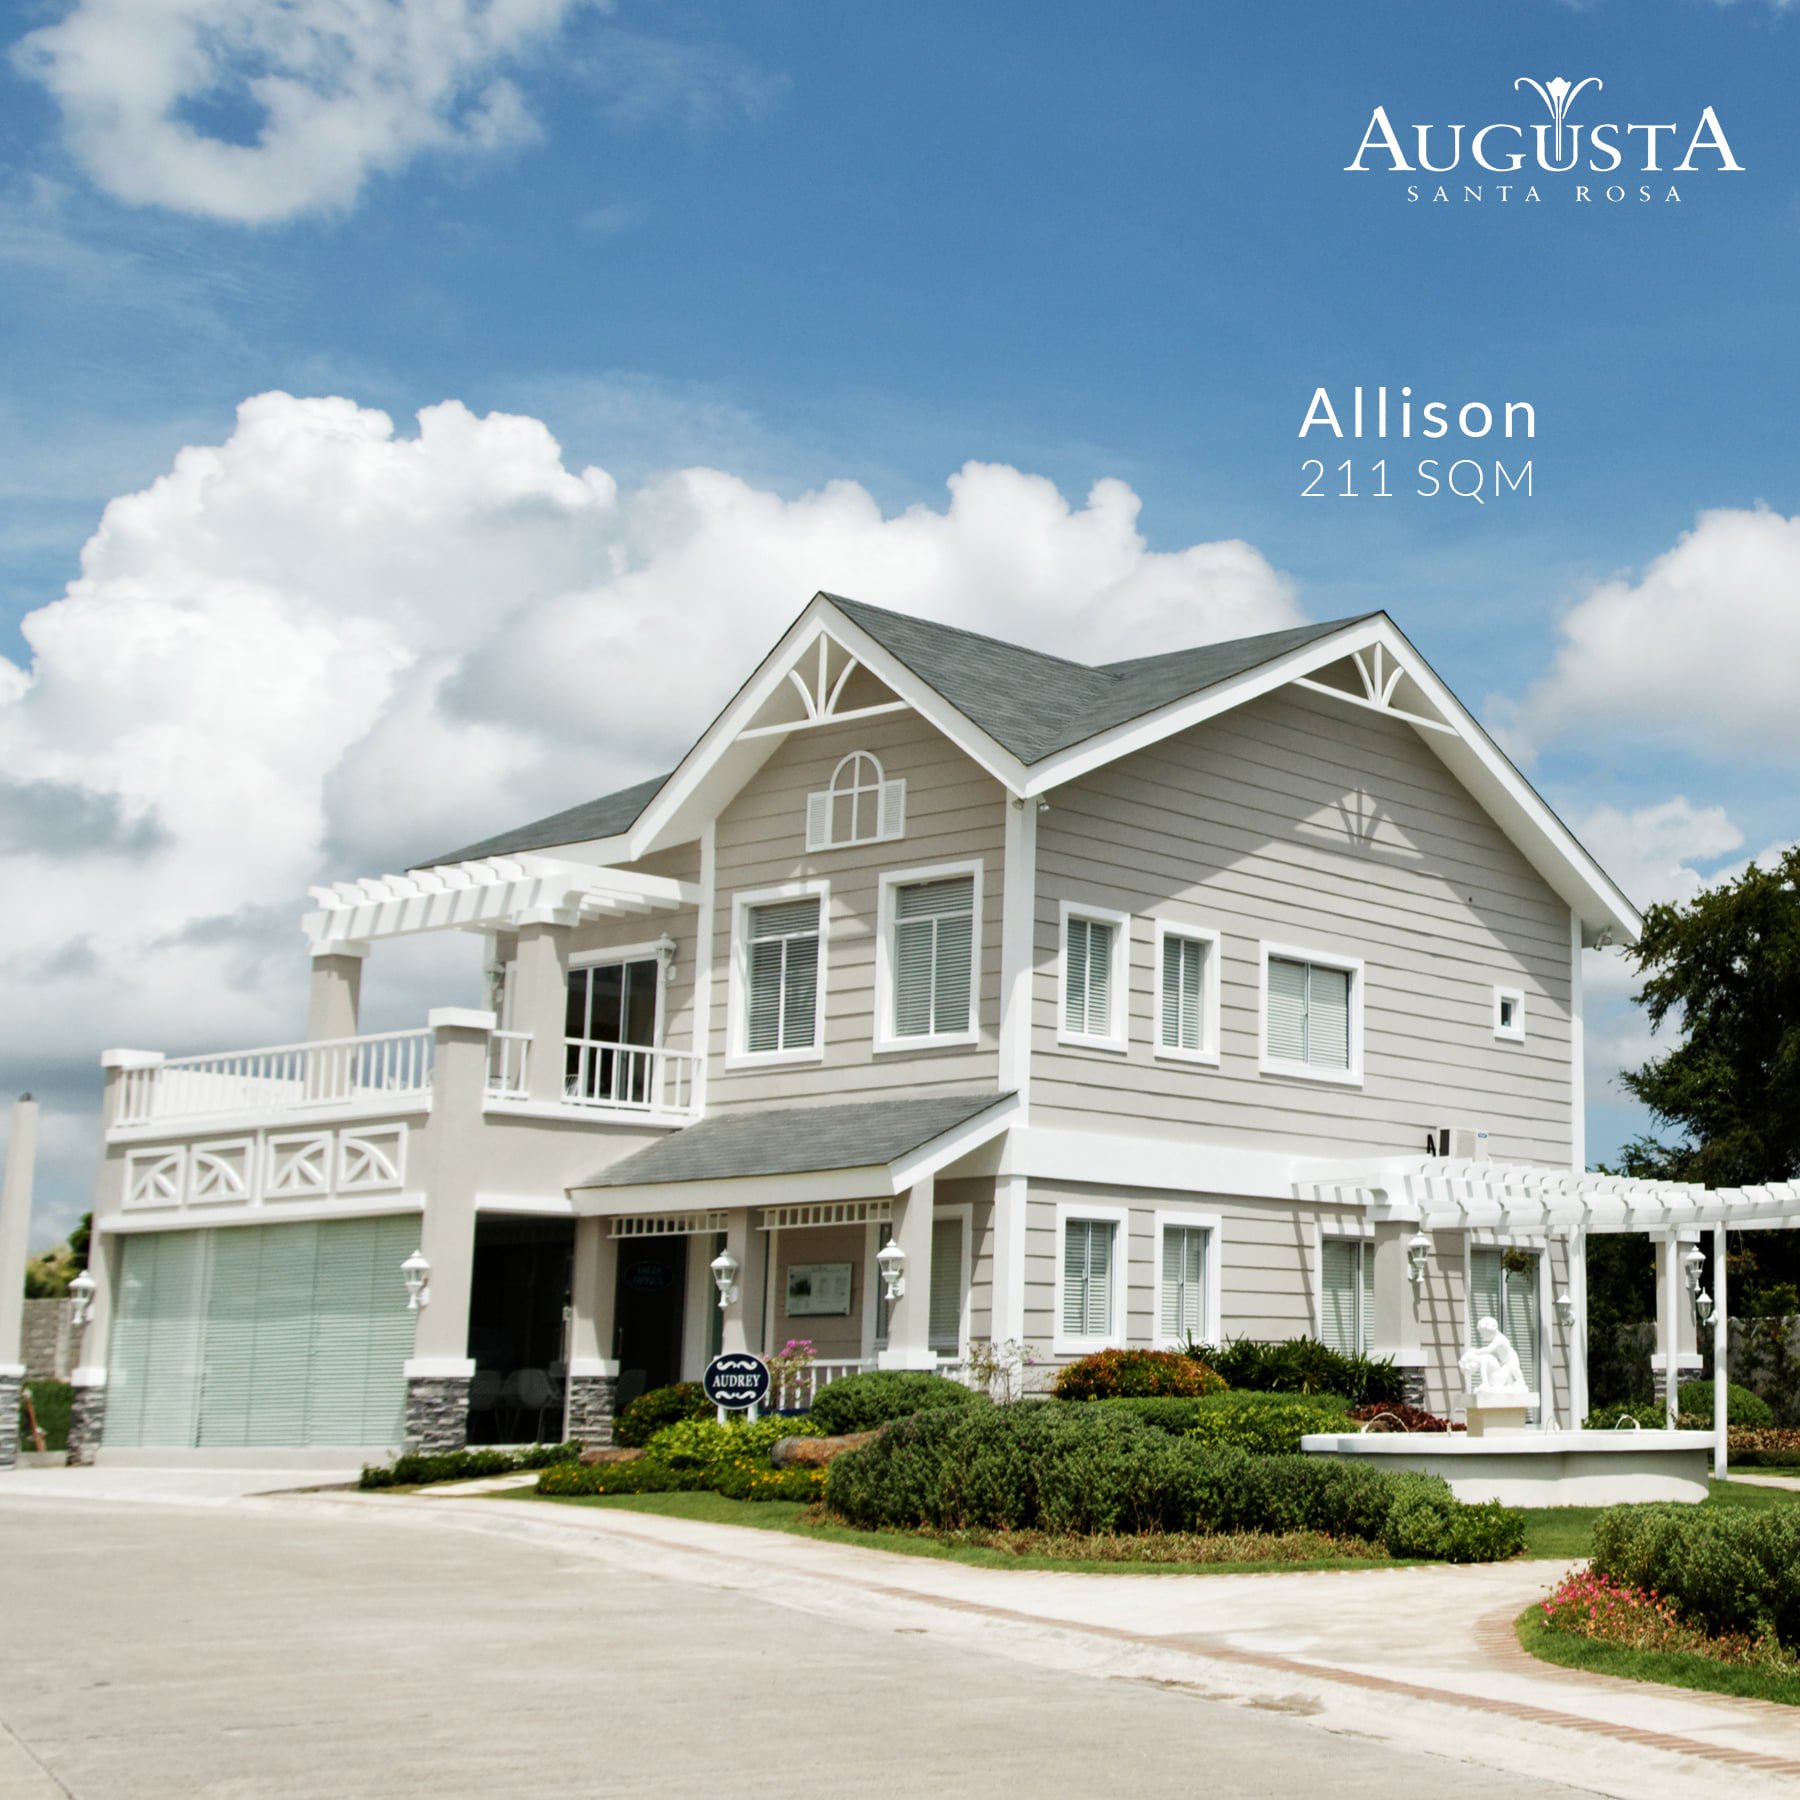 Allison Luxury House Model at Augusta Santa Rosa - Luxury Homes by Brittany